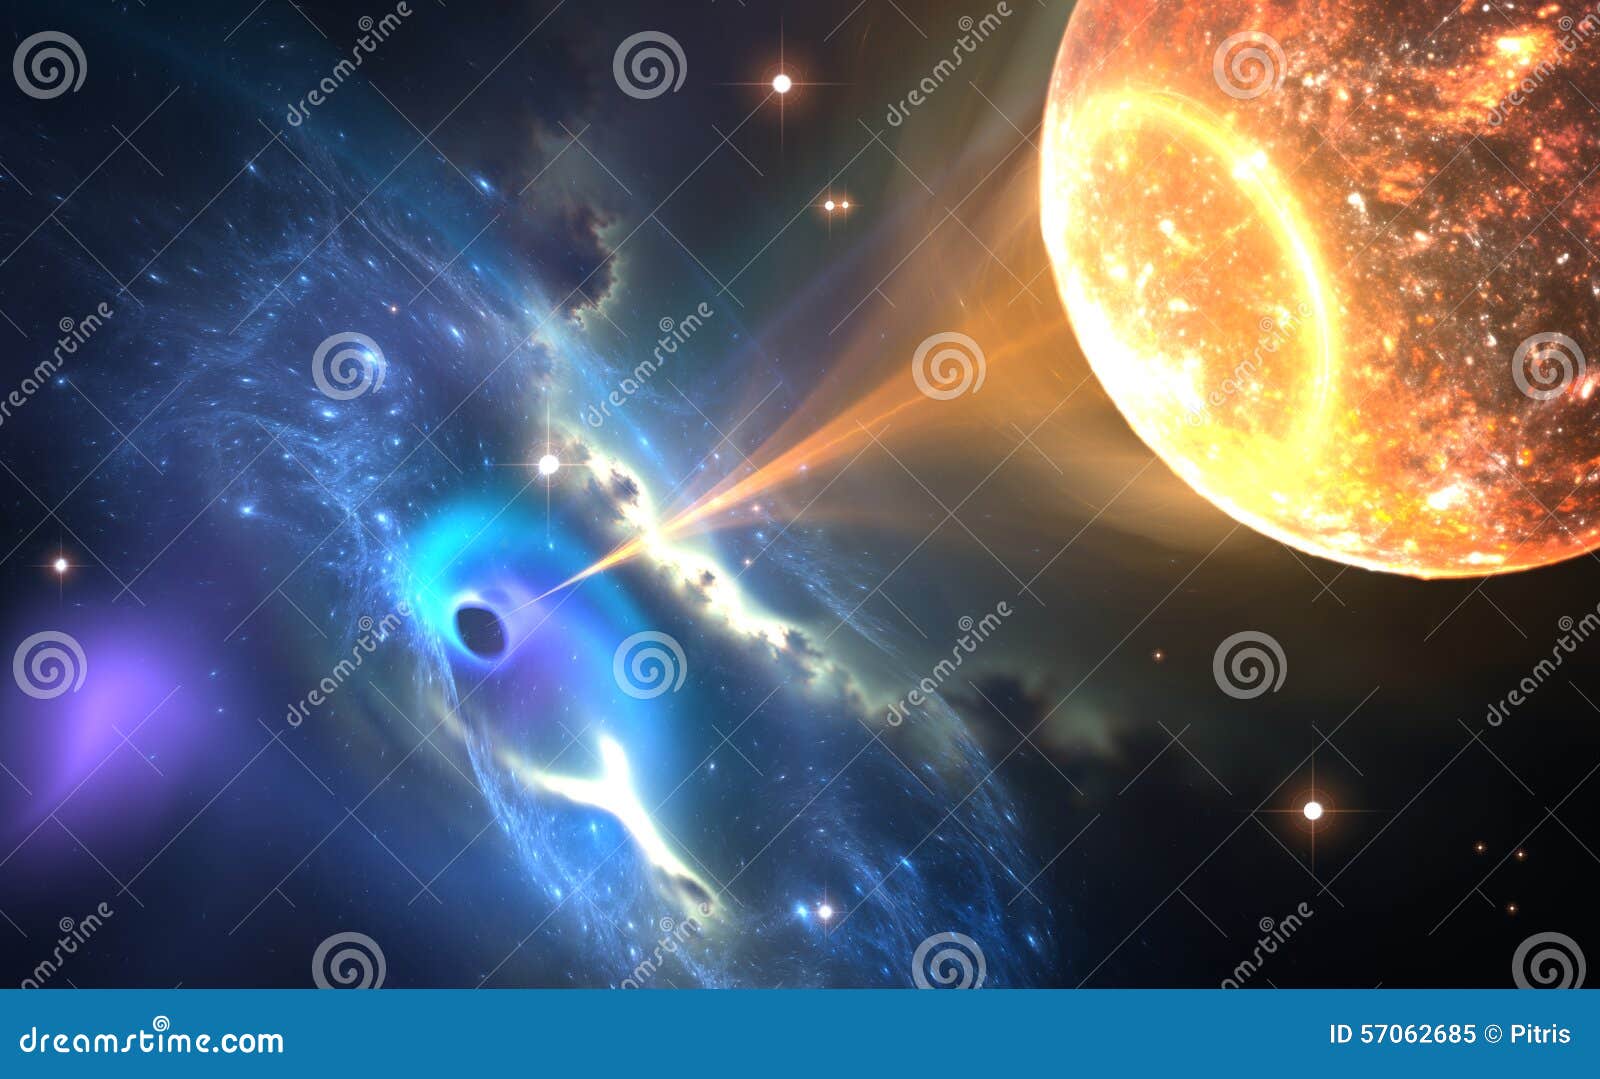 black hole or a neutron star and pulling gas from an orbiting companion star.